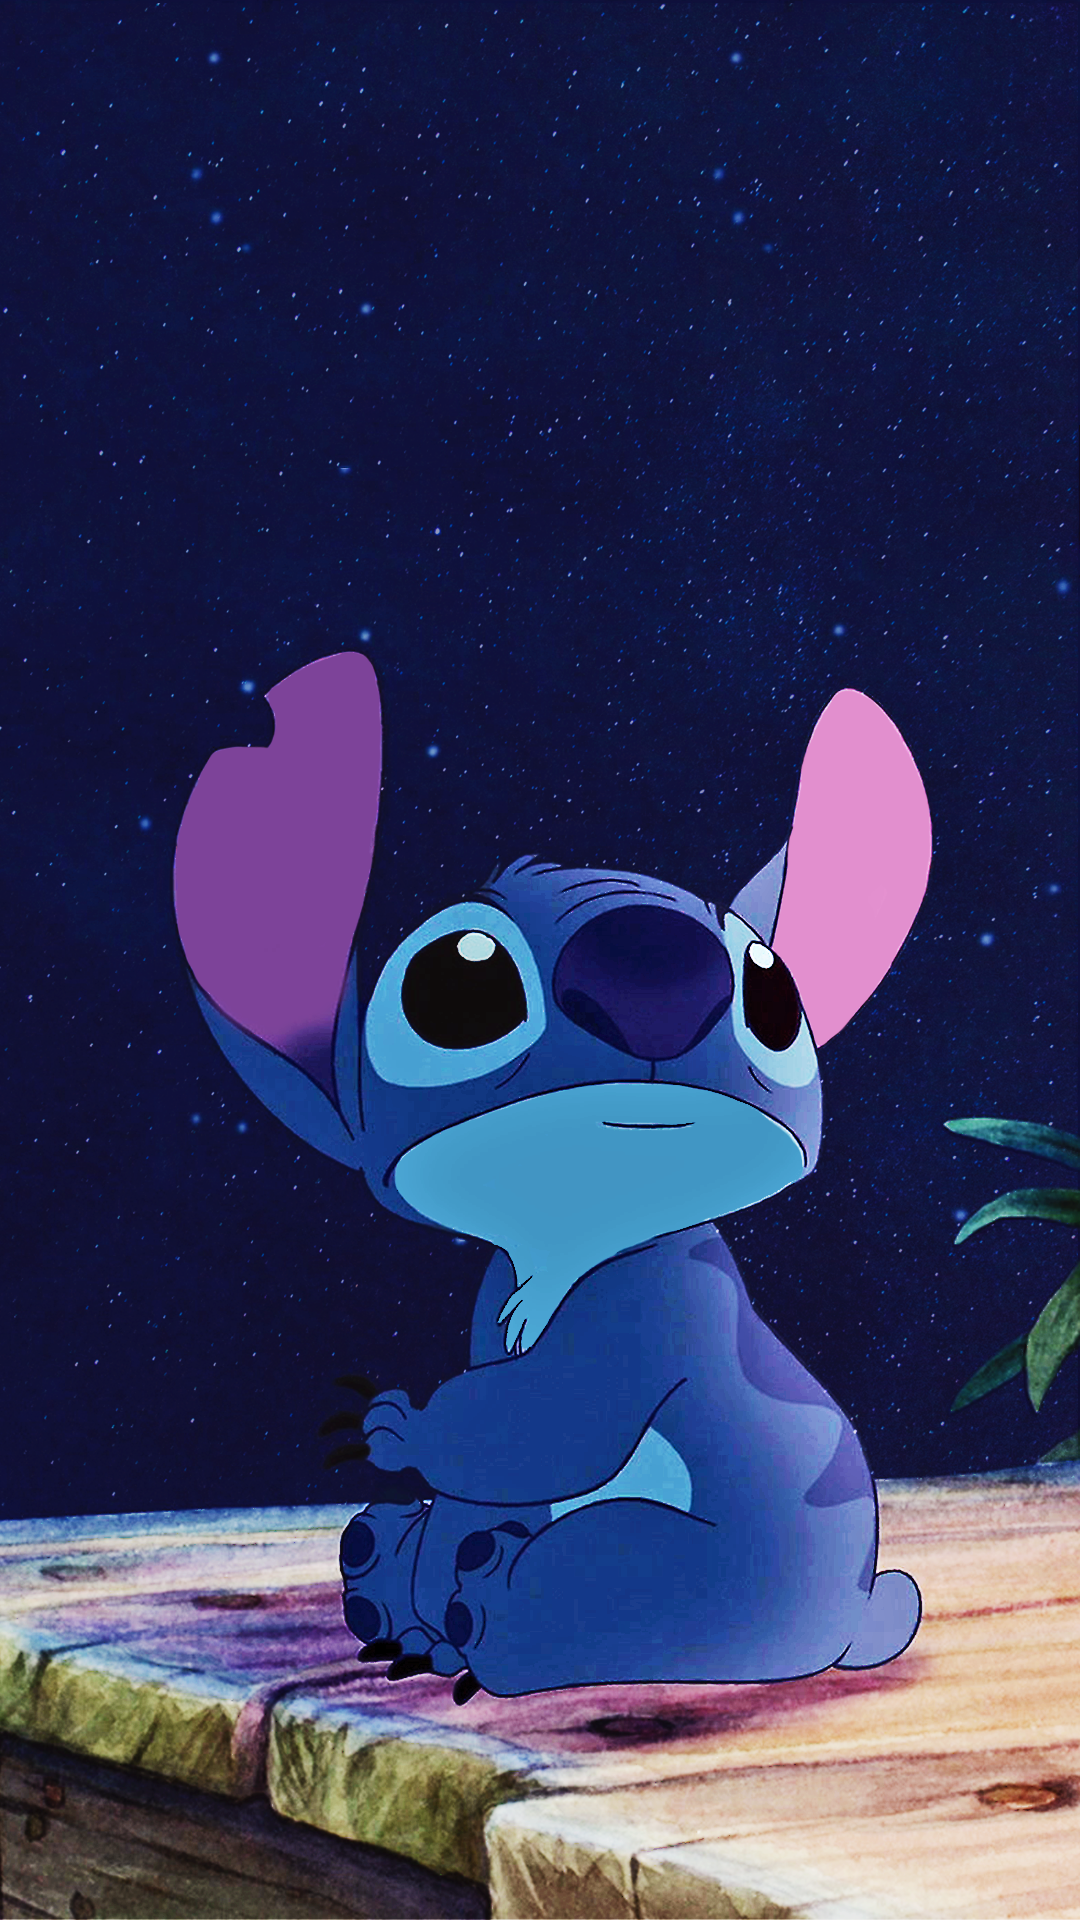 Lilo Stitch HD Wallpapers Backgrounds Wallpaper 19201200